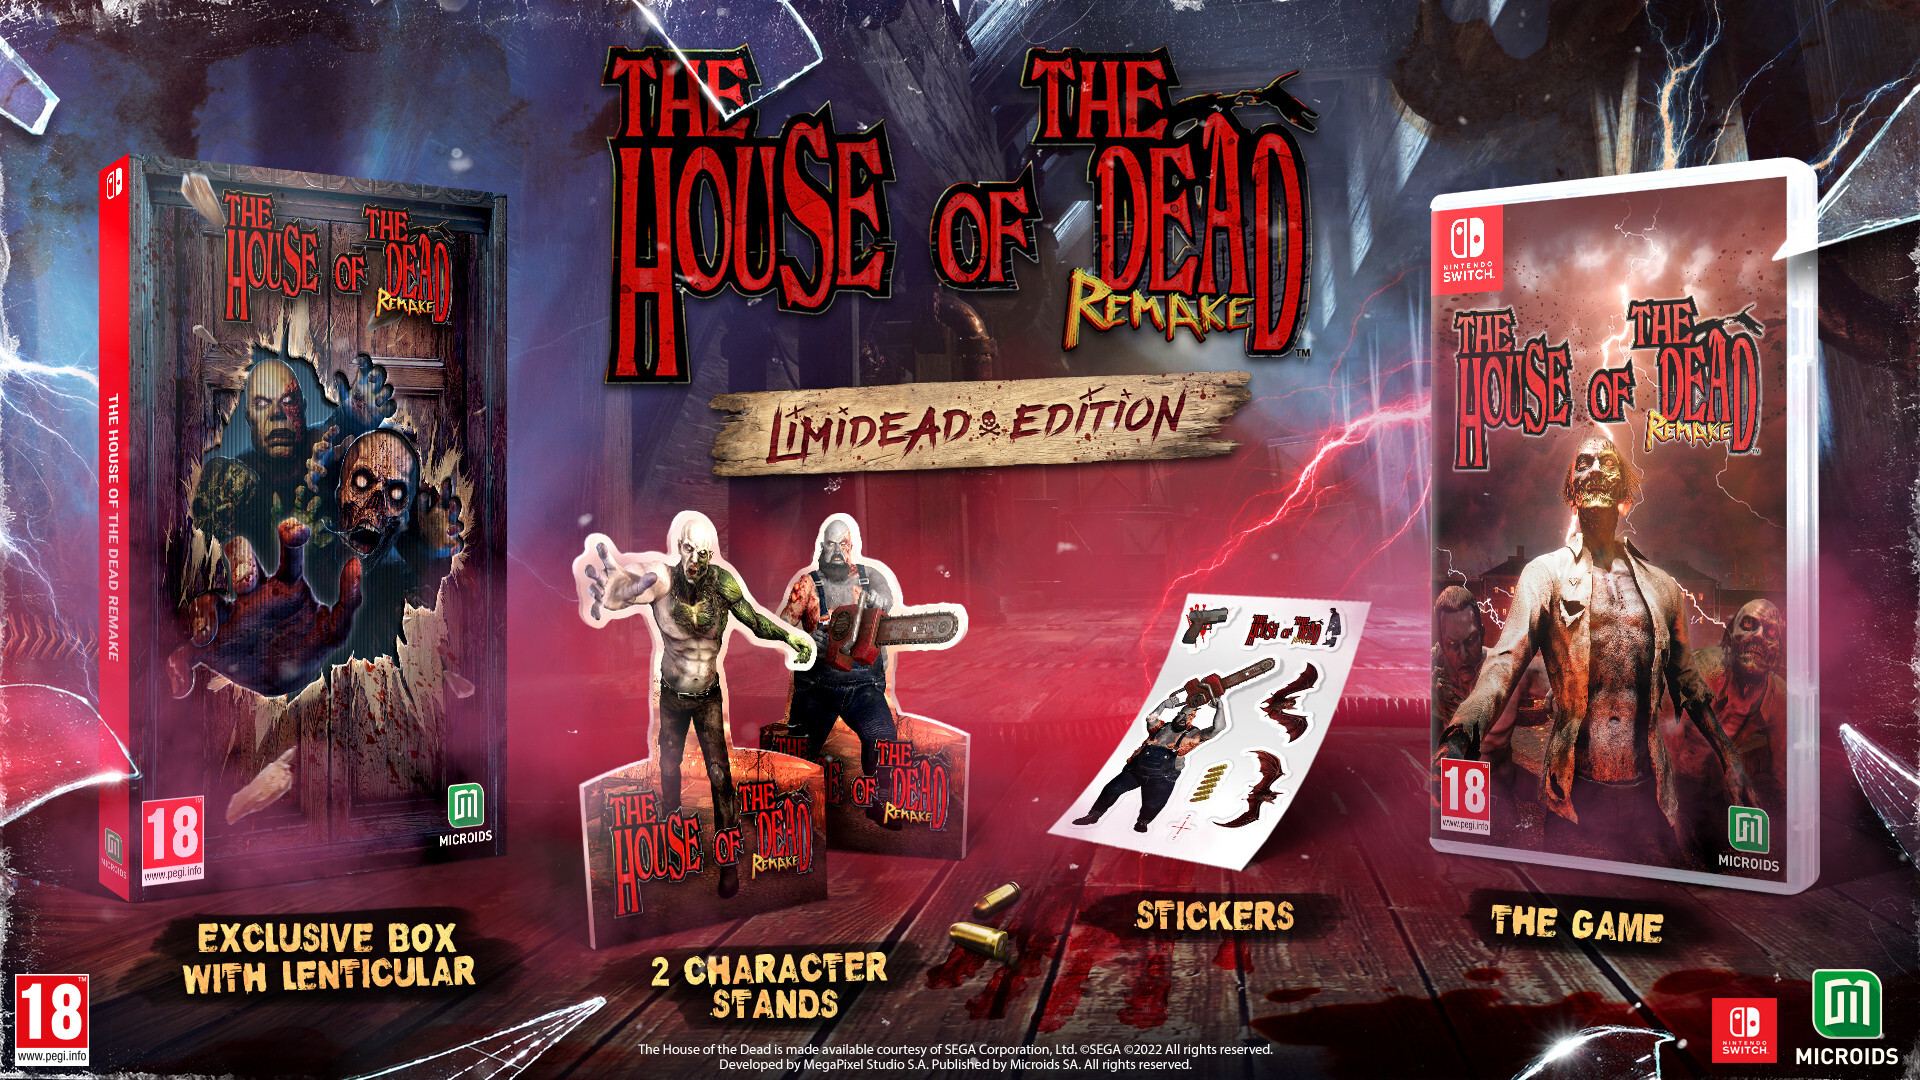 Mindscape The House of the Dead Remake: Limidead Edition PlayStation 4